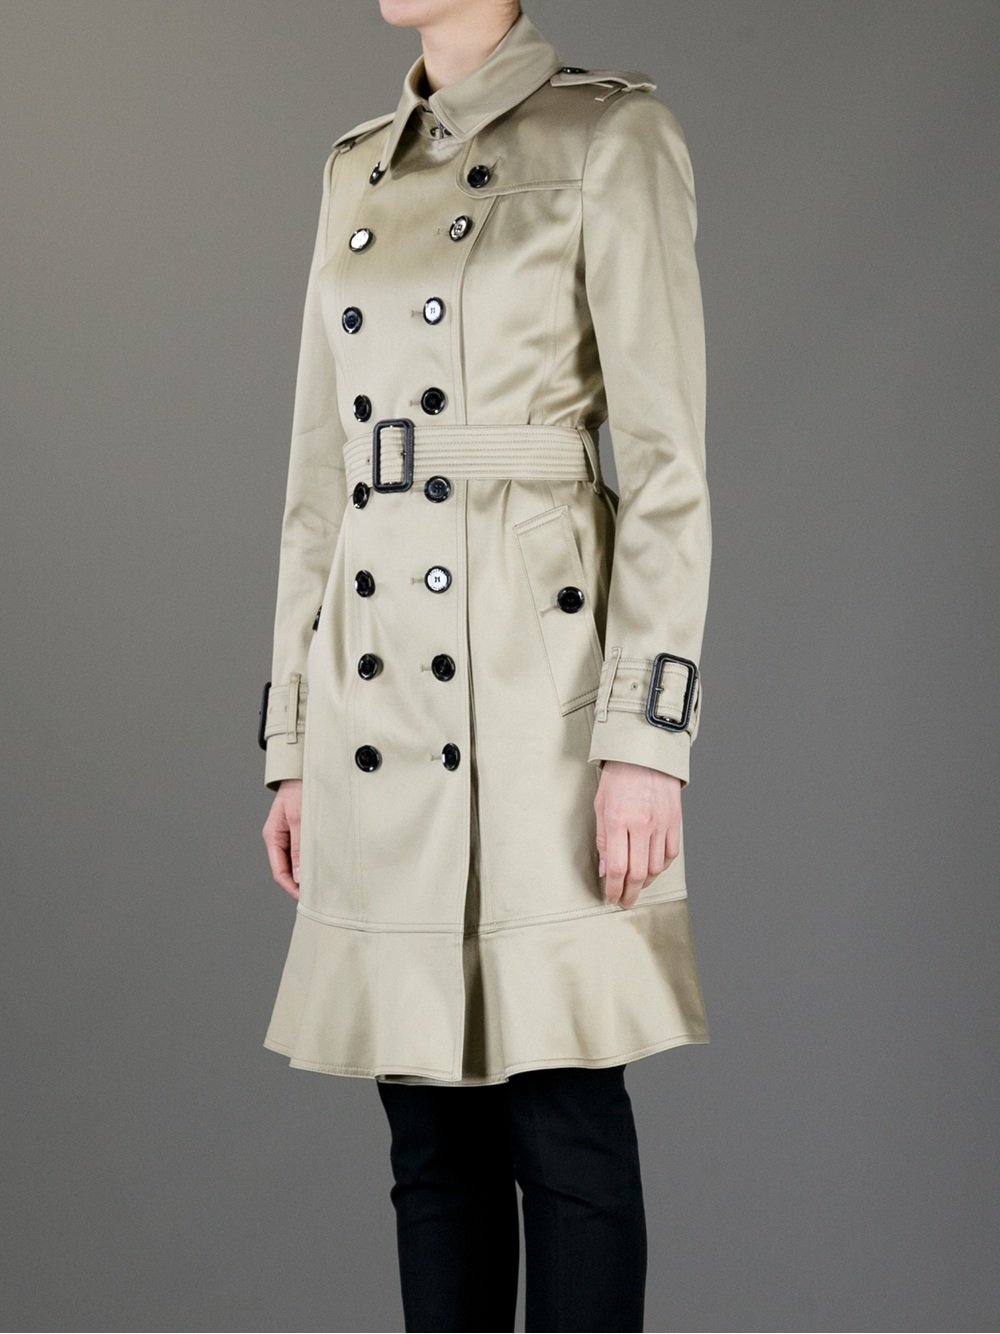 Burberry Brit Frill Hem Trench Coat in Natural | Lyst